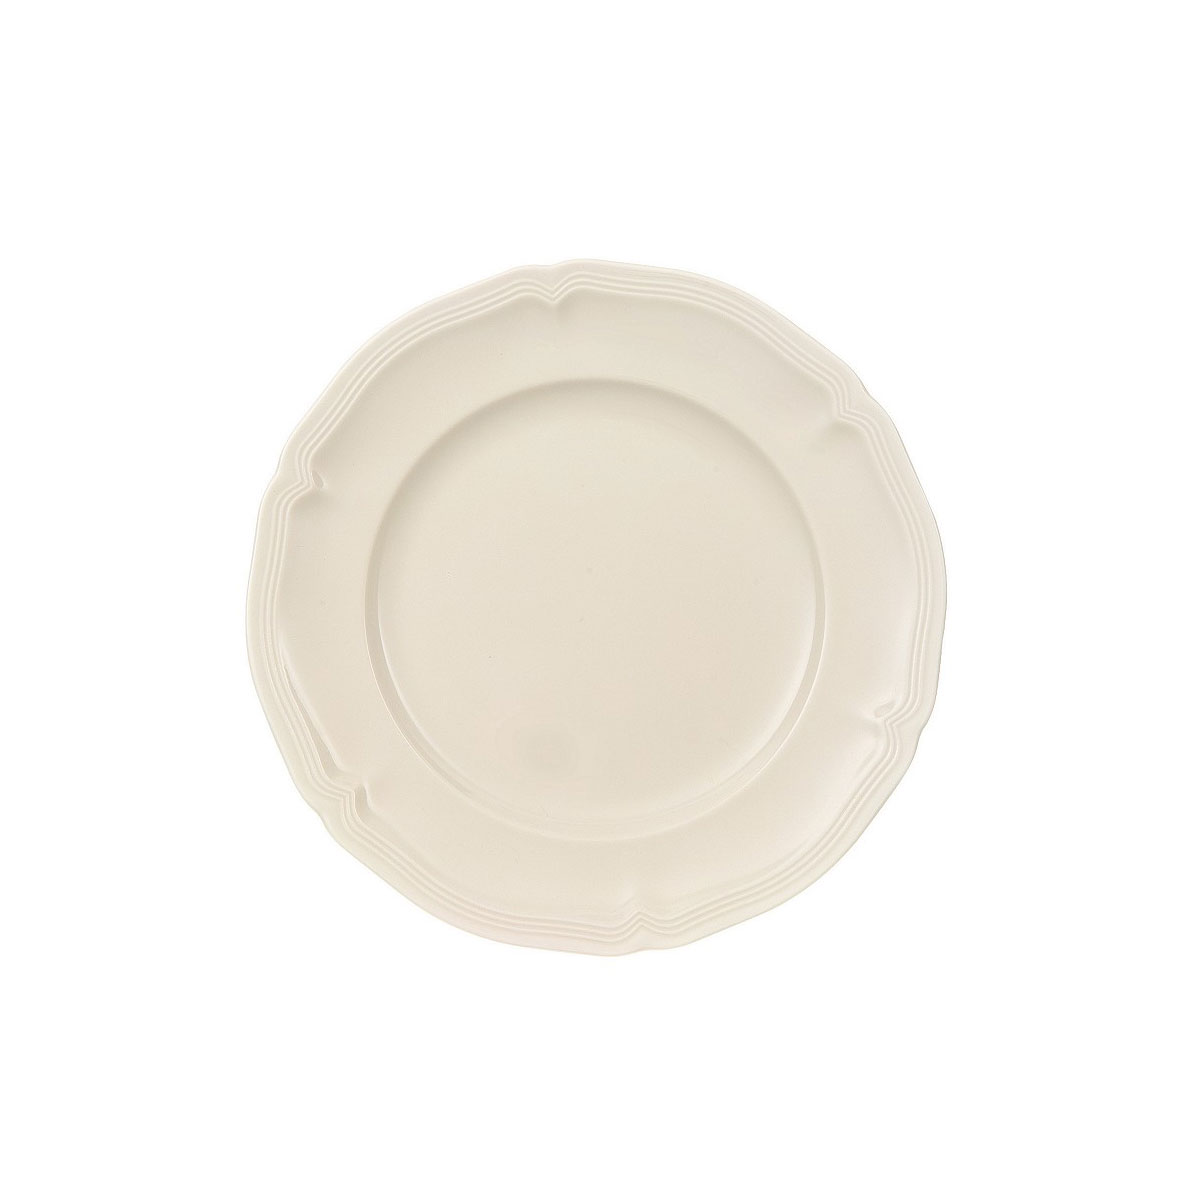 Villeroy and Boch Manoir Bread and Butter Plate, Single